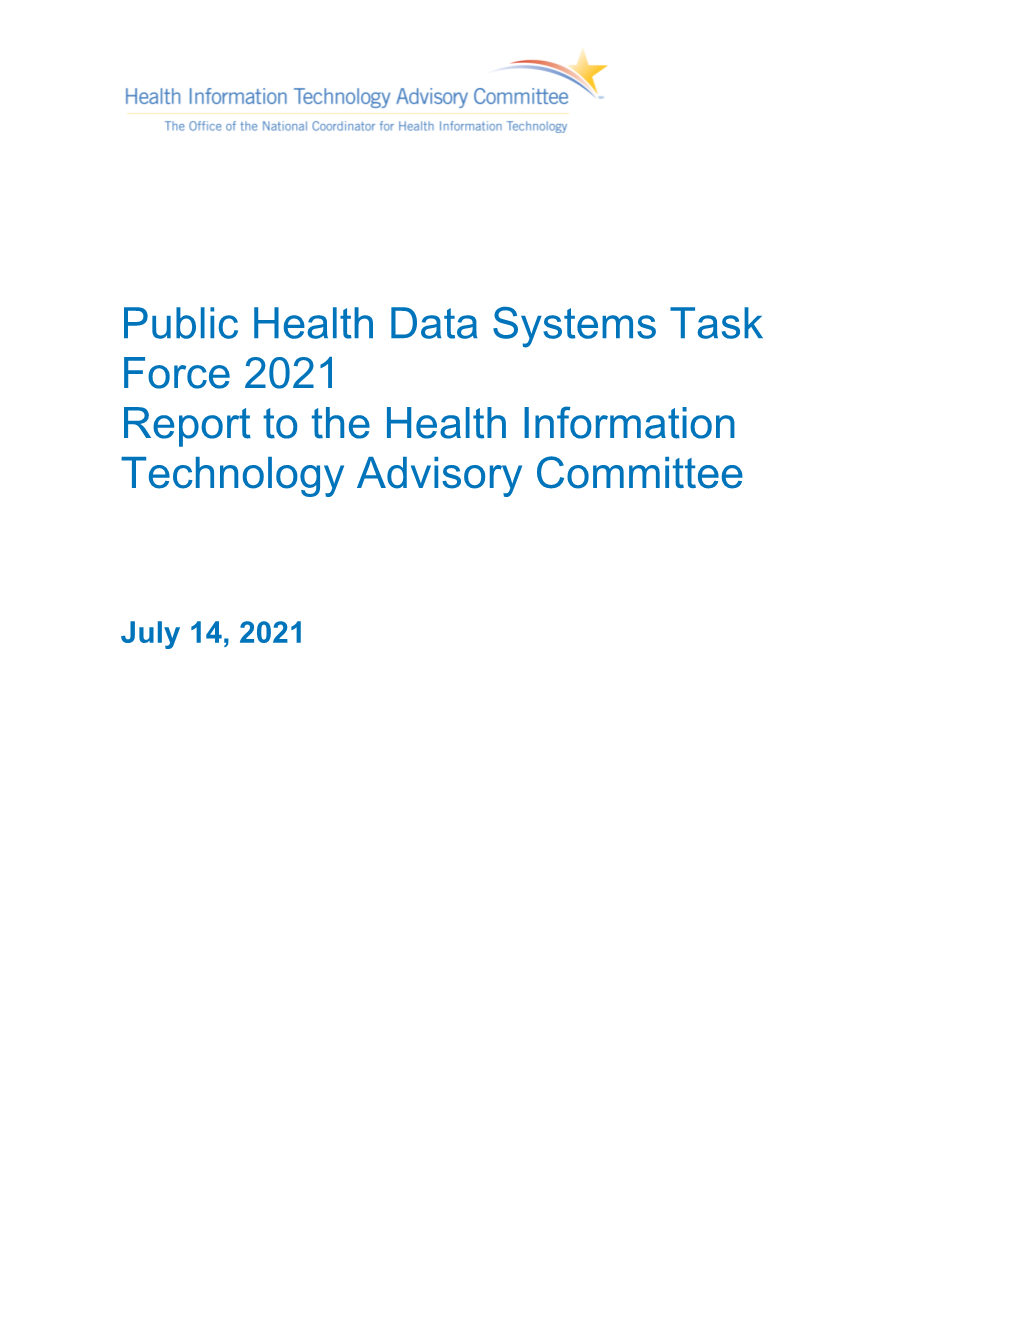 Public Health Data Systems Task Force 2021 Recommendations Report